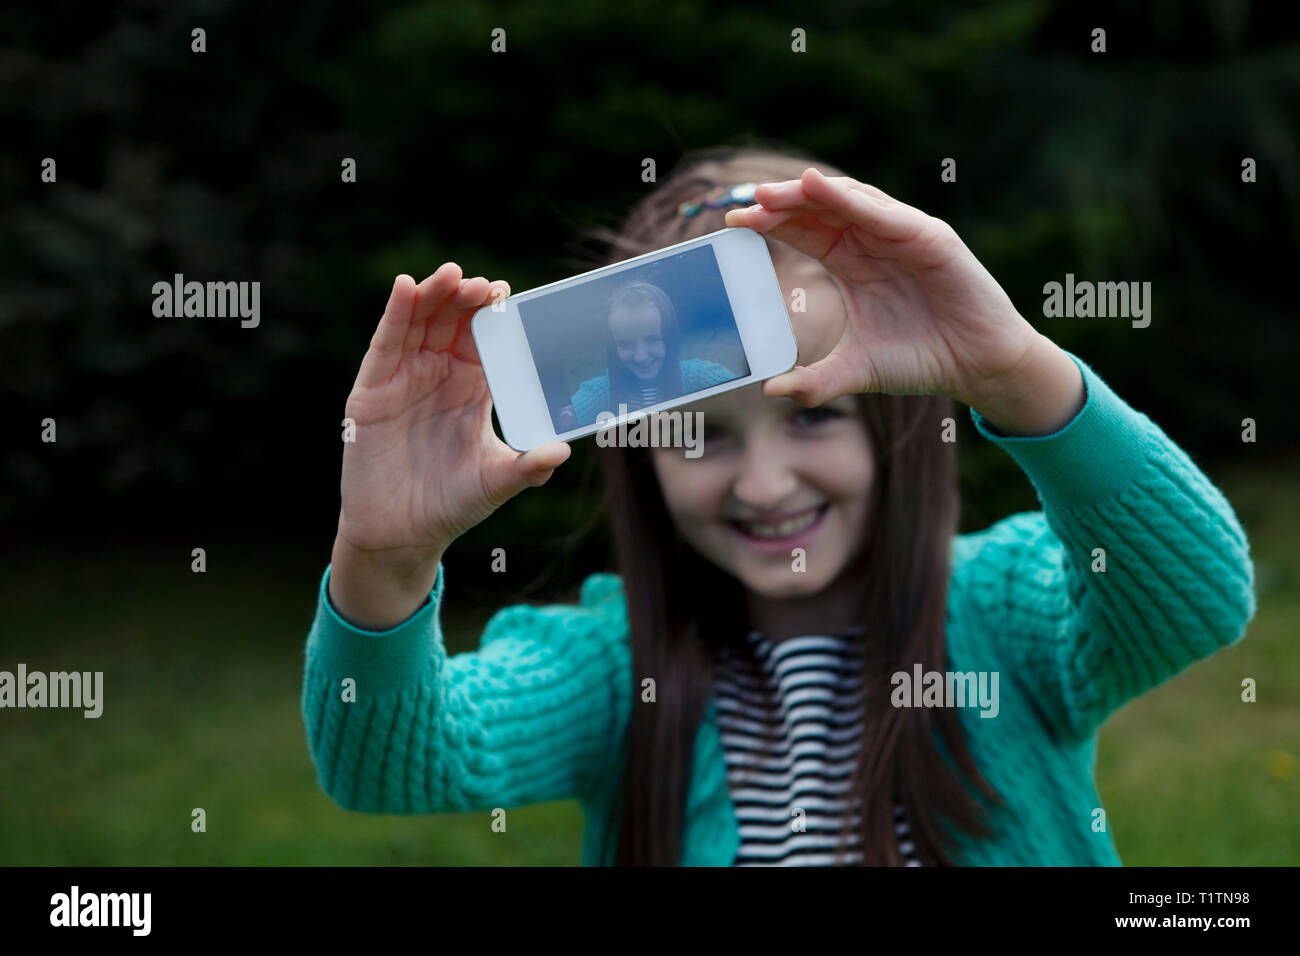 Smiling child using smartphone to take a selfie Stock Photo